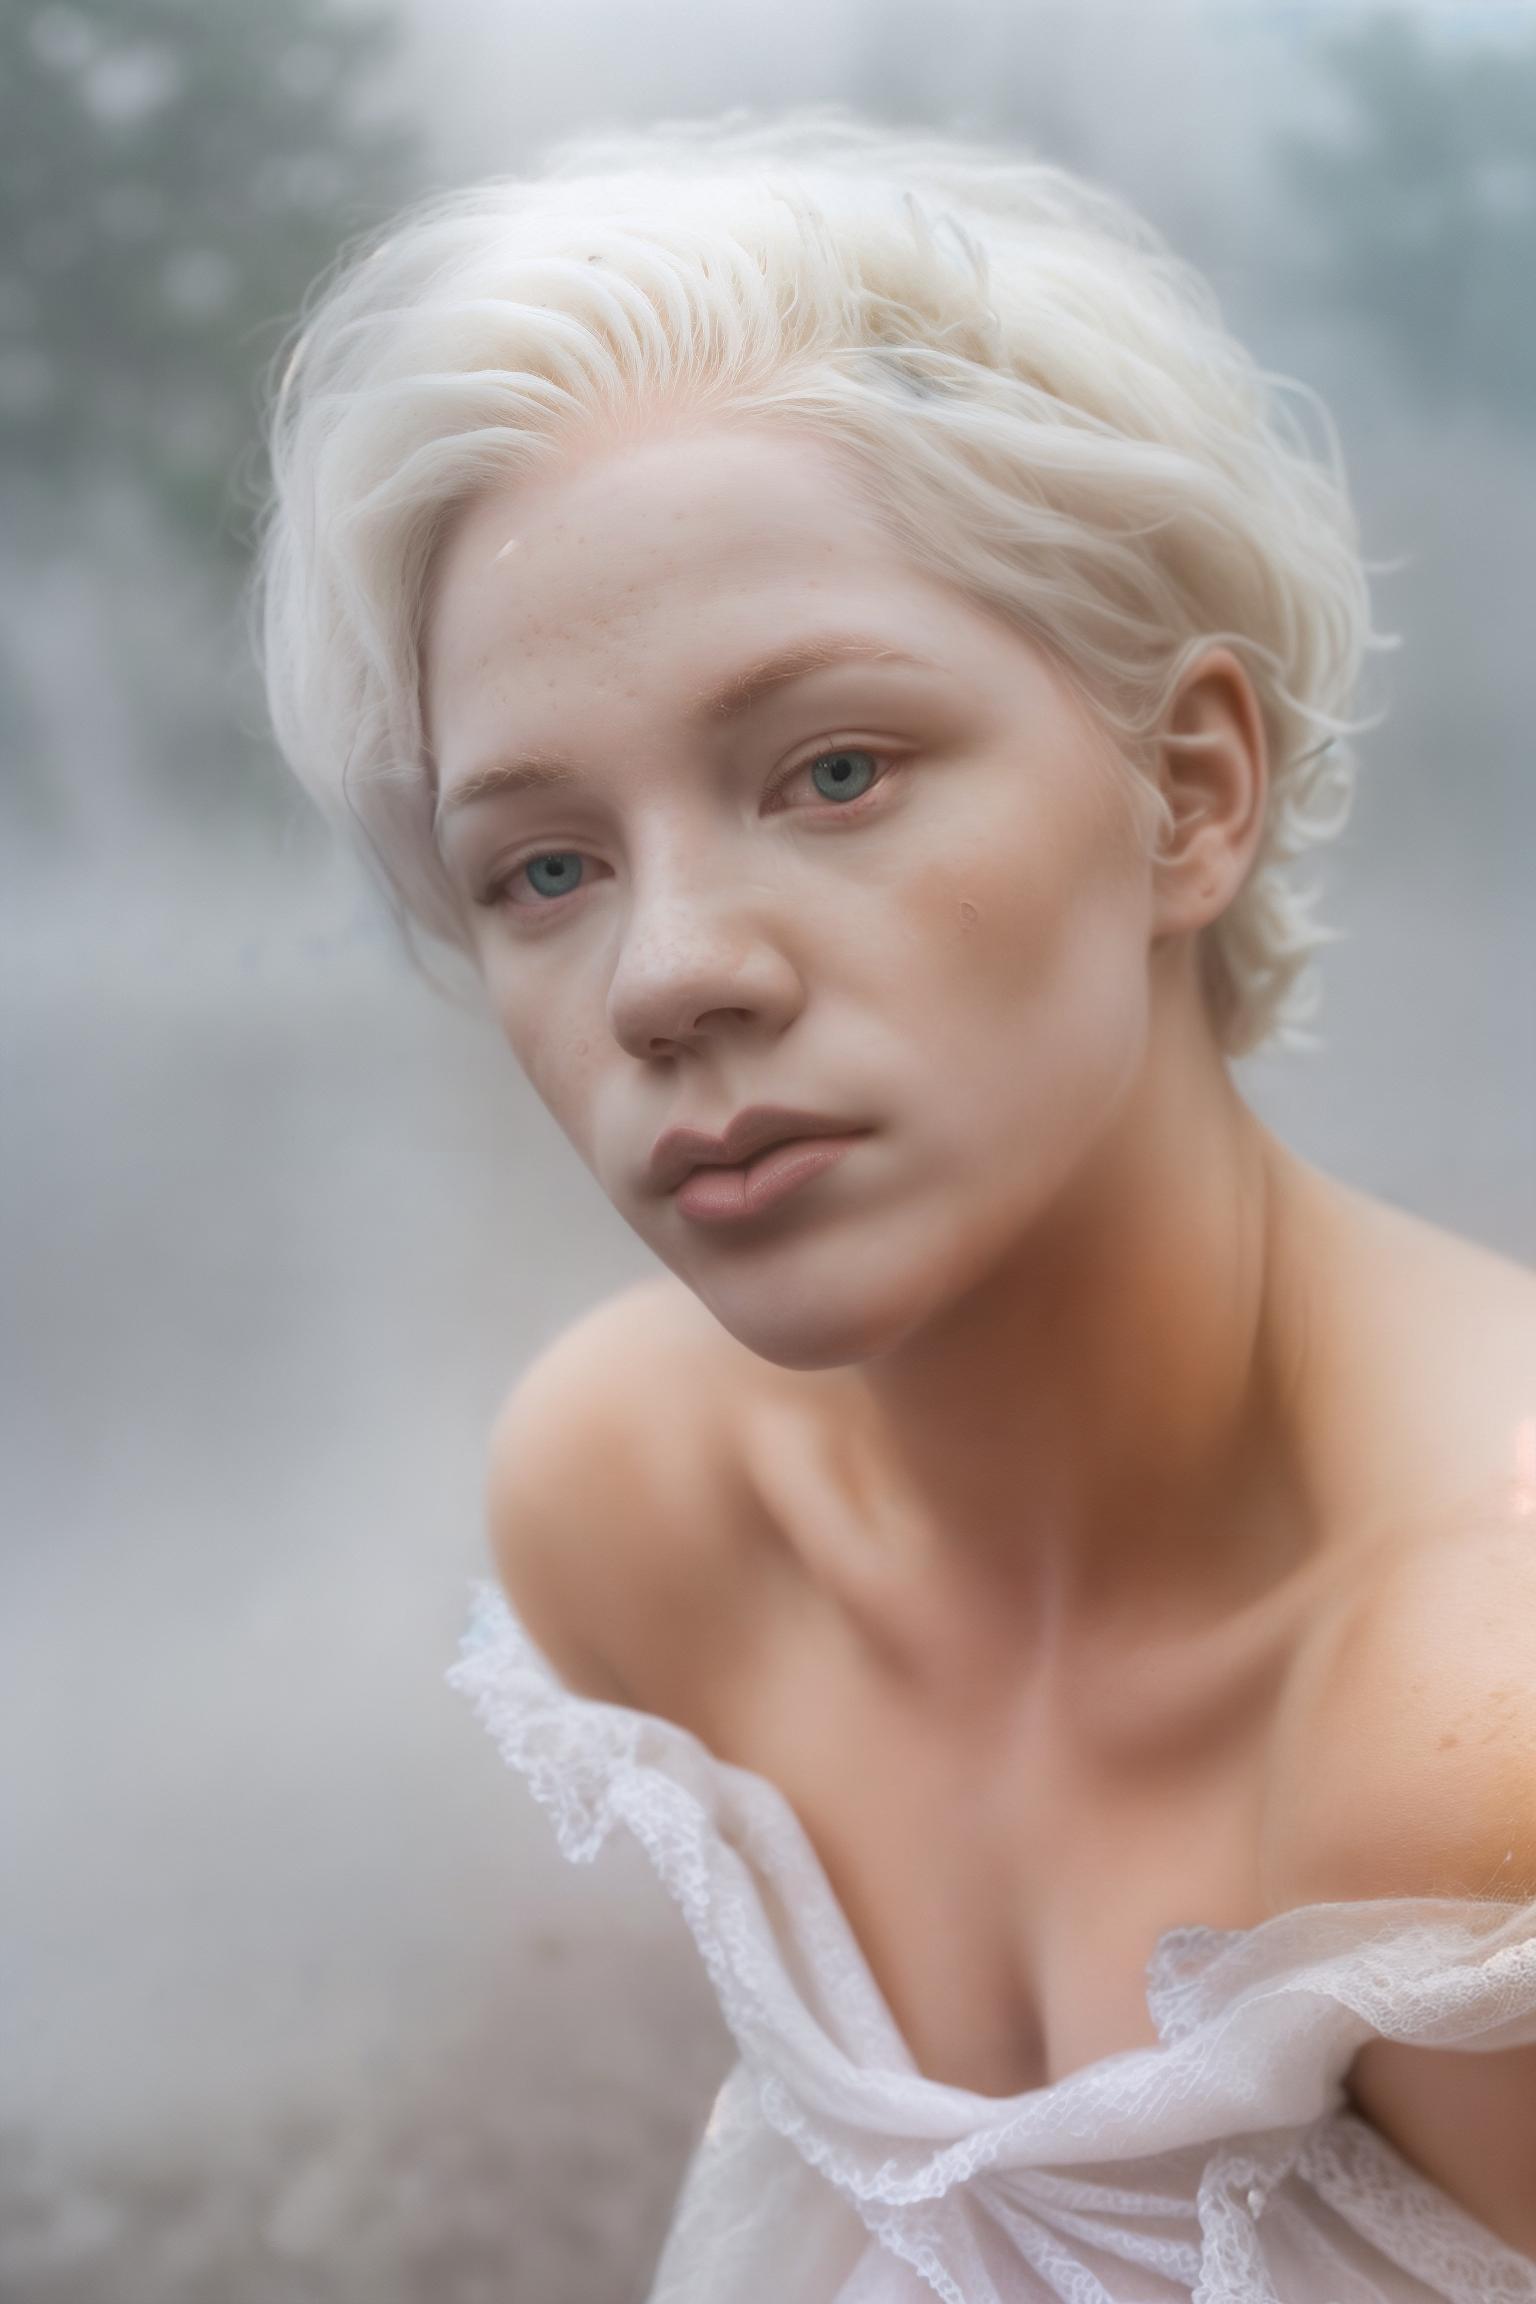  speedpainting Speedpainting, (Dark Fantasy Aesthetic:1.2), (Glamour:1.3) photo of a 20yo, (strikingly beautiful:1.2) vivacious, enigmatic, ethereal, (albino:1.3) (nymph:1.3), (albinism:1.4), Lengthened Rectangular Face with Noticeable Jaw and Cheekbones, Clean, Straight Eyebrows, Wide Set Close Set Eyes, Majestic Aquiline Nose, Full Lips, windswept (Fine) (stylish short white hair:1.3), (looking at viewer),(Ashen skin:1.3), (flawless skin:1.3), (shiny skin), diaphanous white dress, high neckline on dress, (foggy:1.4), (bathed in thick fog:1.4), (half obscured:1.3), (Close up:1.2), Dutch Angle), (dynamic composition:1.2), (shallow depth of field:1.2), bright lighting vibrant, ((masterpiece)), ((Realistic Vision)),((fine details)), RAW, 8K, U